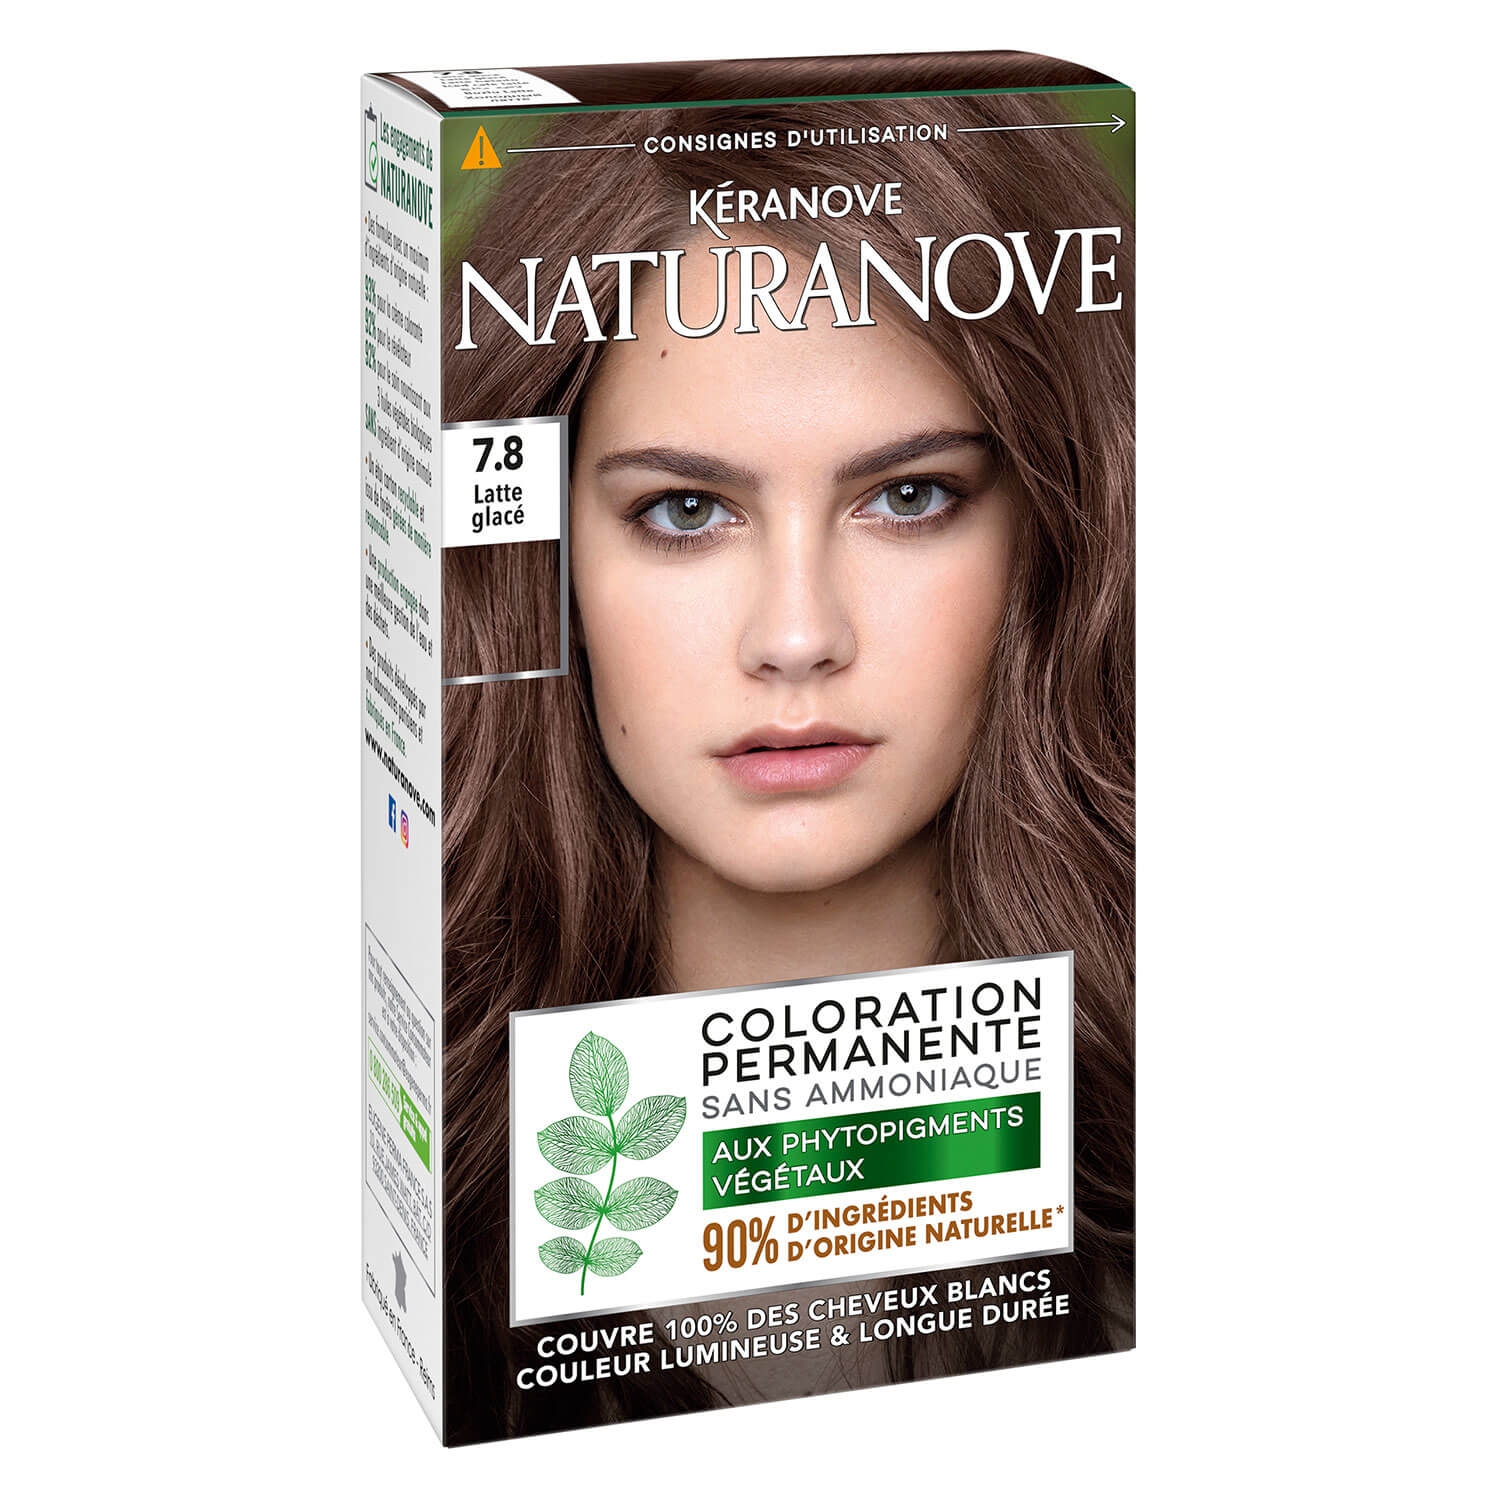 Product image from Naturanove - Dauerhafte Haarfarbe Iced Cafe Latte 7.8